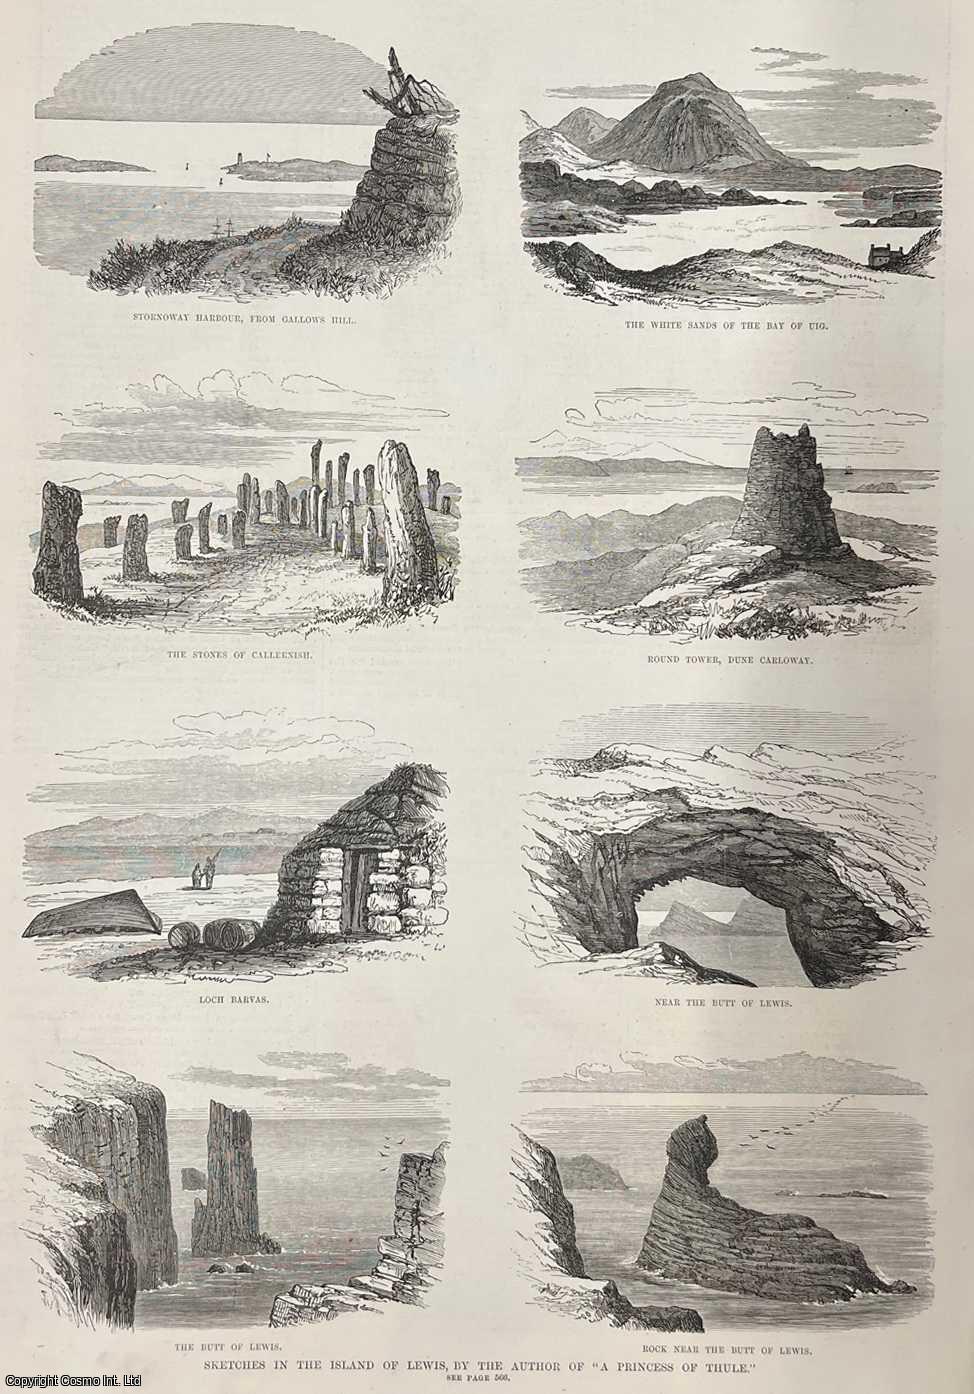 ISLE OF LEWIS - Sketches in the Island of Lewis, by William Black. A collection of original woodcut engravings, with accompanying text from the Illustrated London News, 1875.